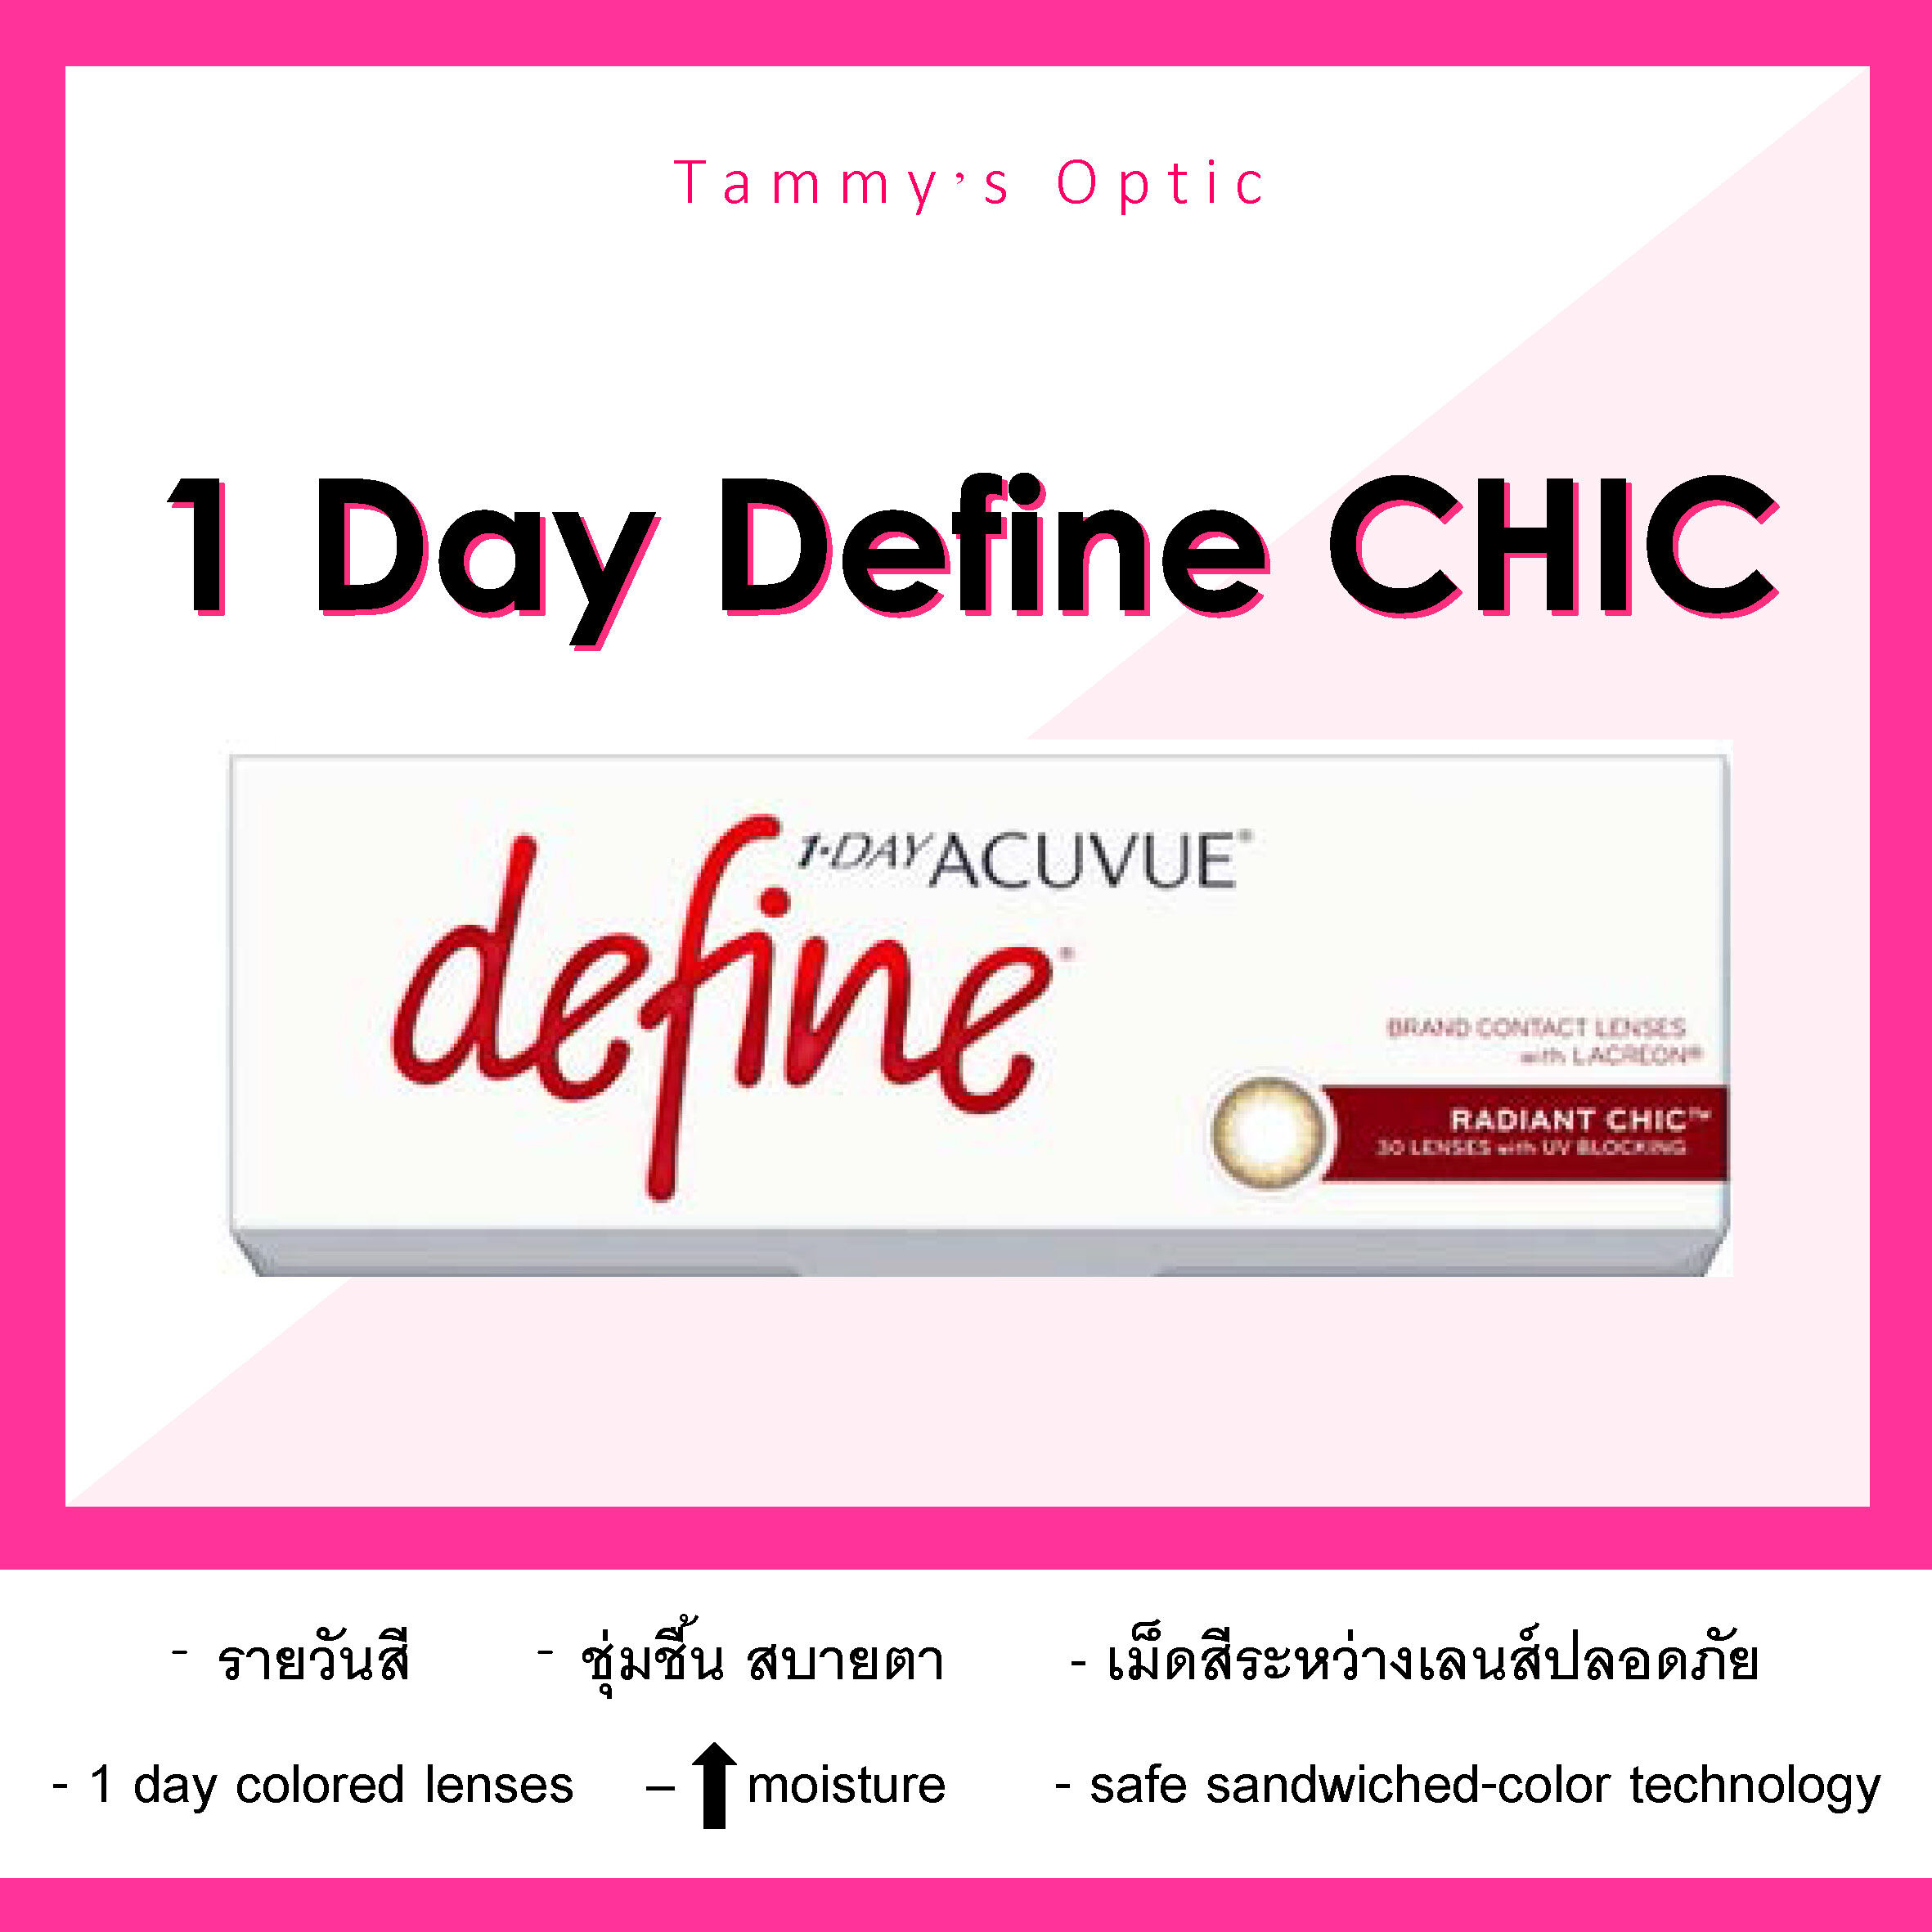 1 day acuvue define radiant chic tammy's optic